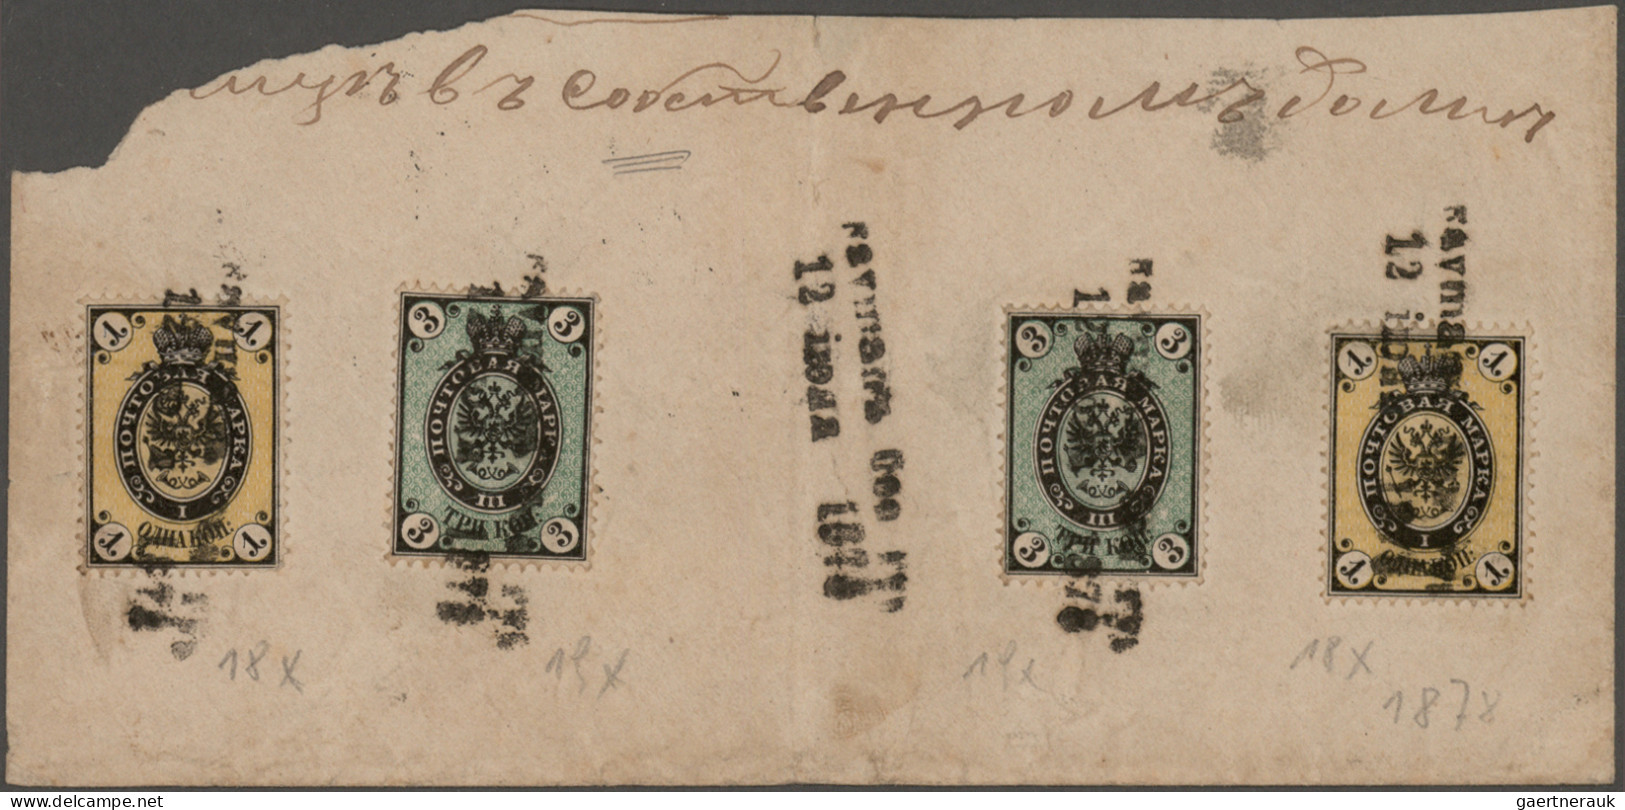 Russia: 1854-1883: Collection of 22 covers and postcards including 16 items from